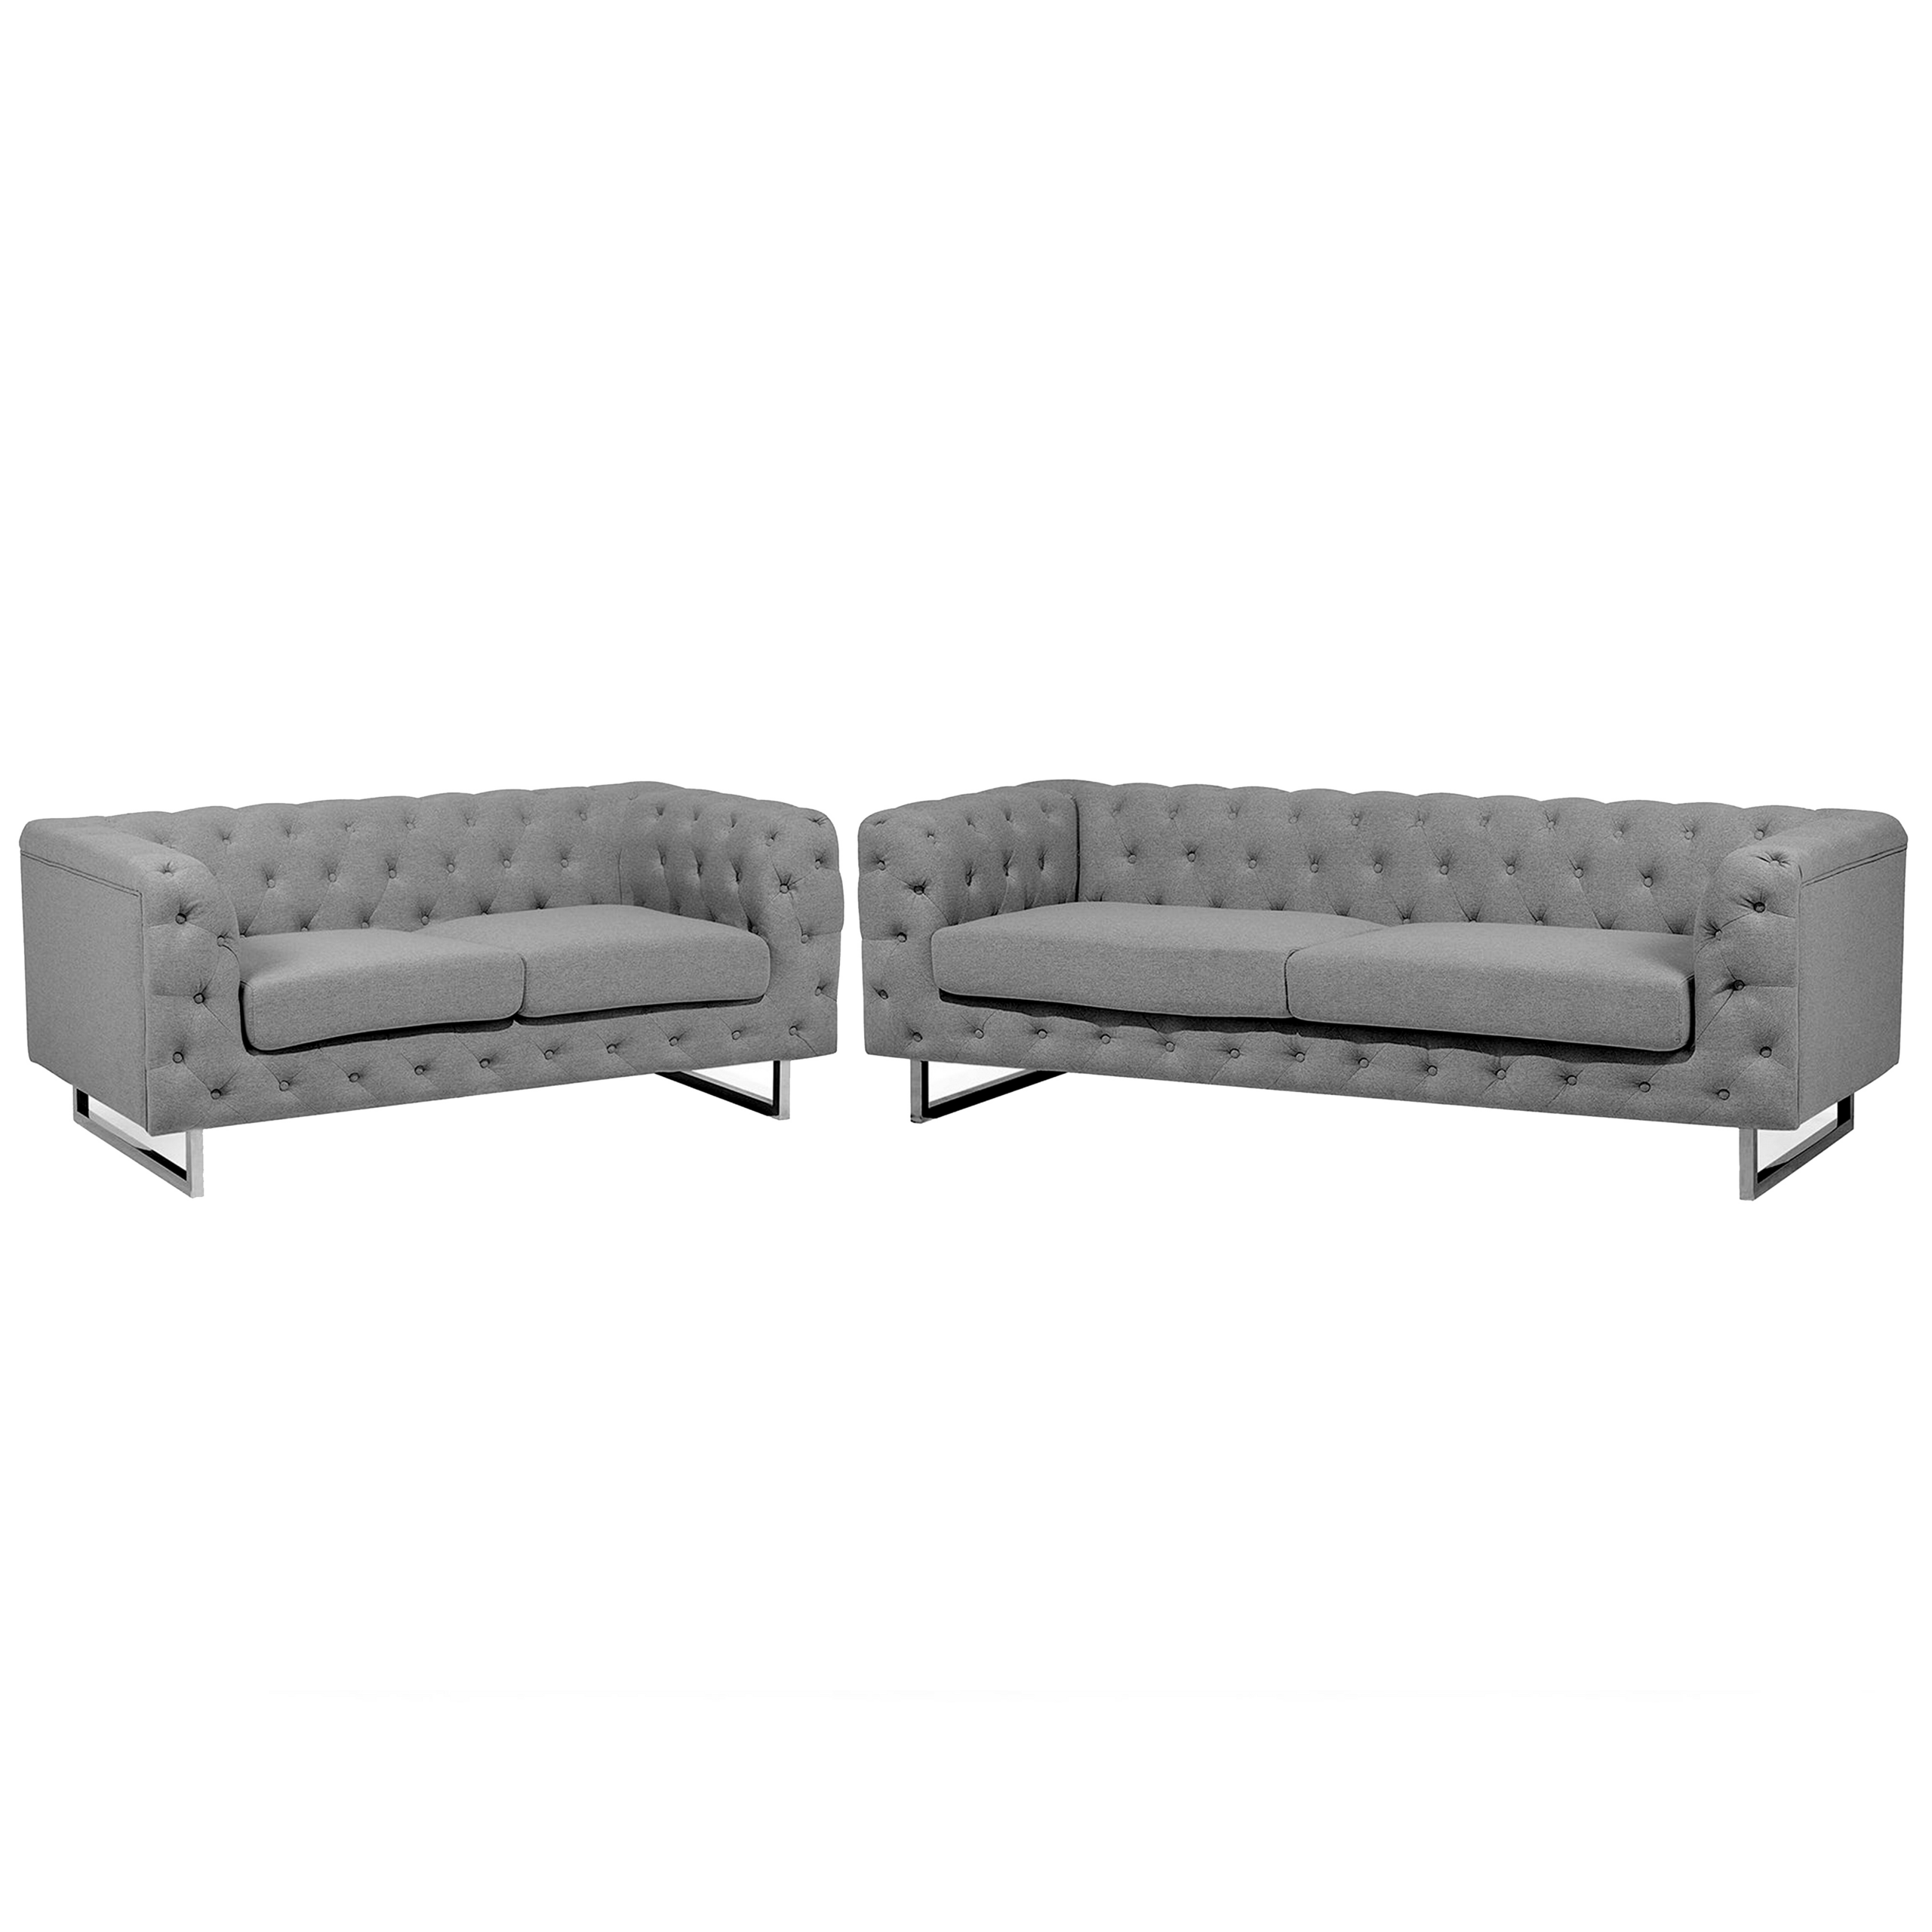 Beliani 5 Seater Chesterfield Sofa Set Light Grey Button Tufted